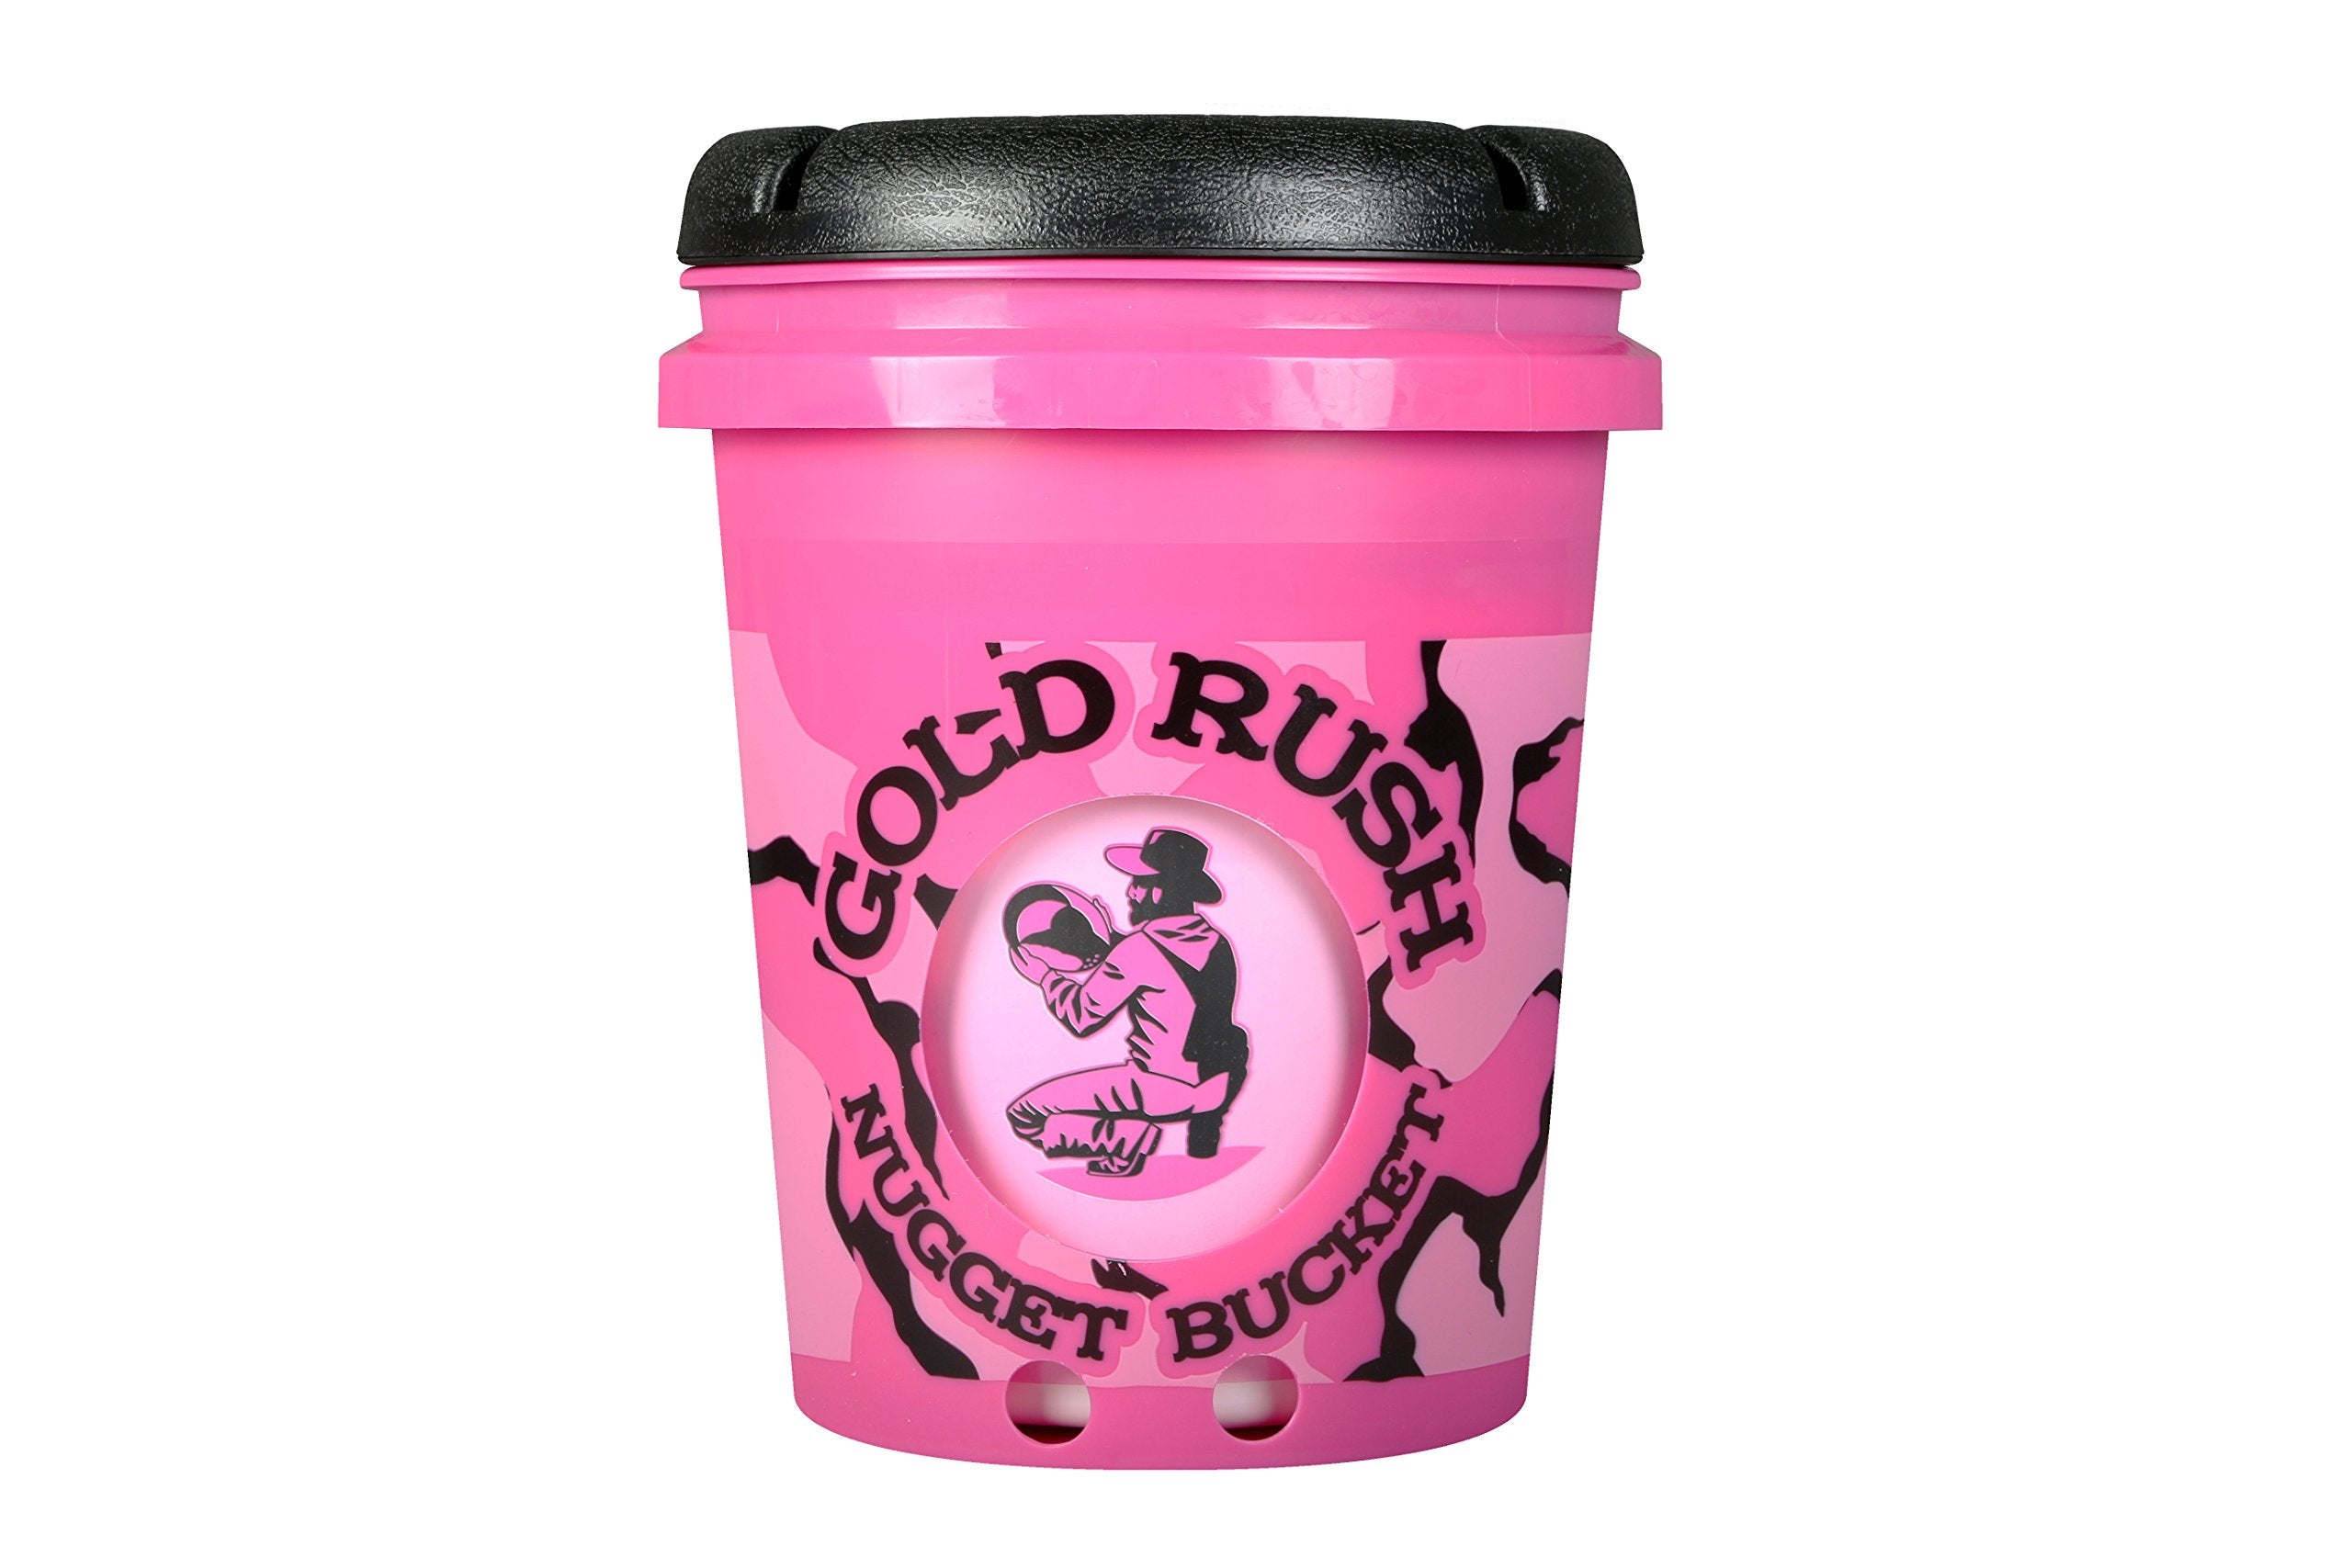 Gold Rush Nugget Bucket with Free Golden Dirt Bag - Gold Prospectors Association of America